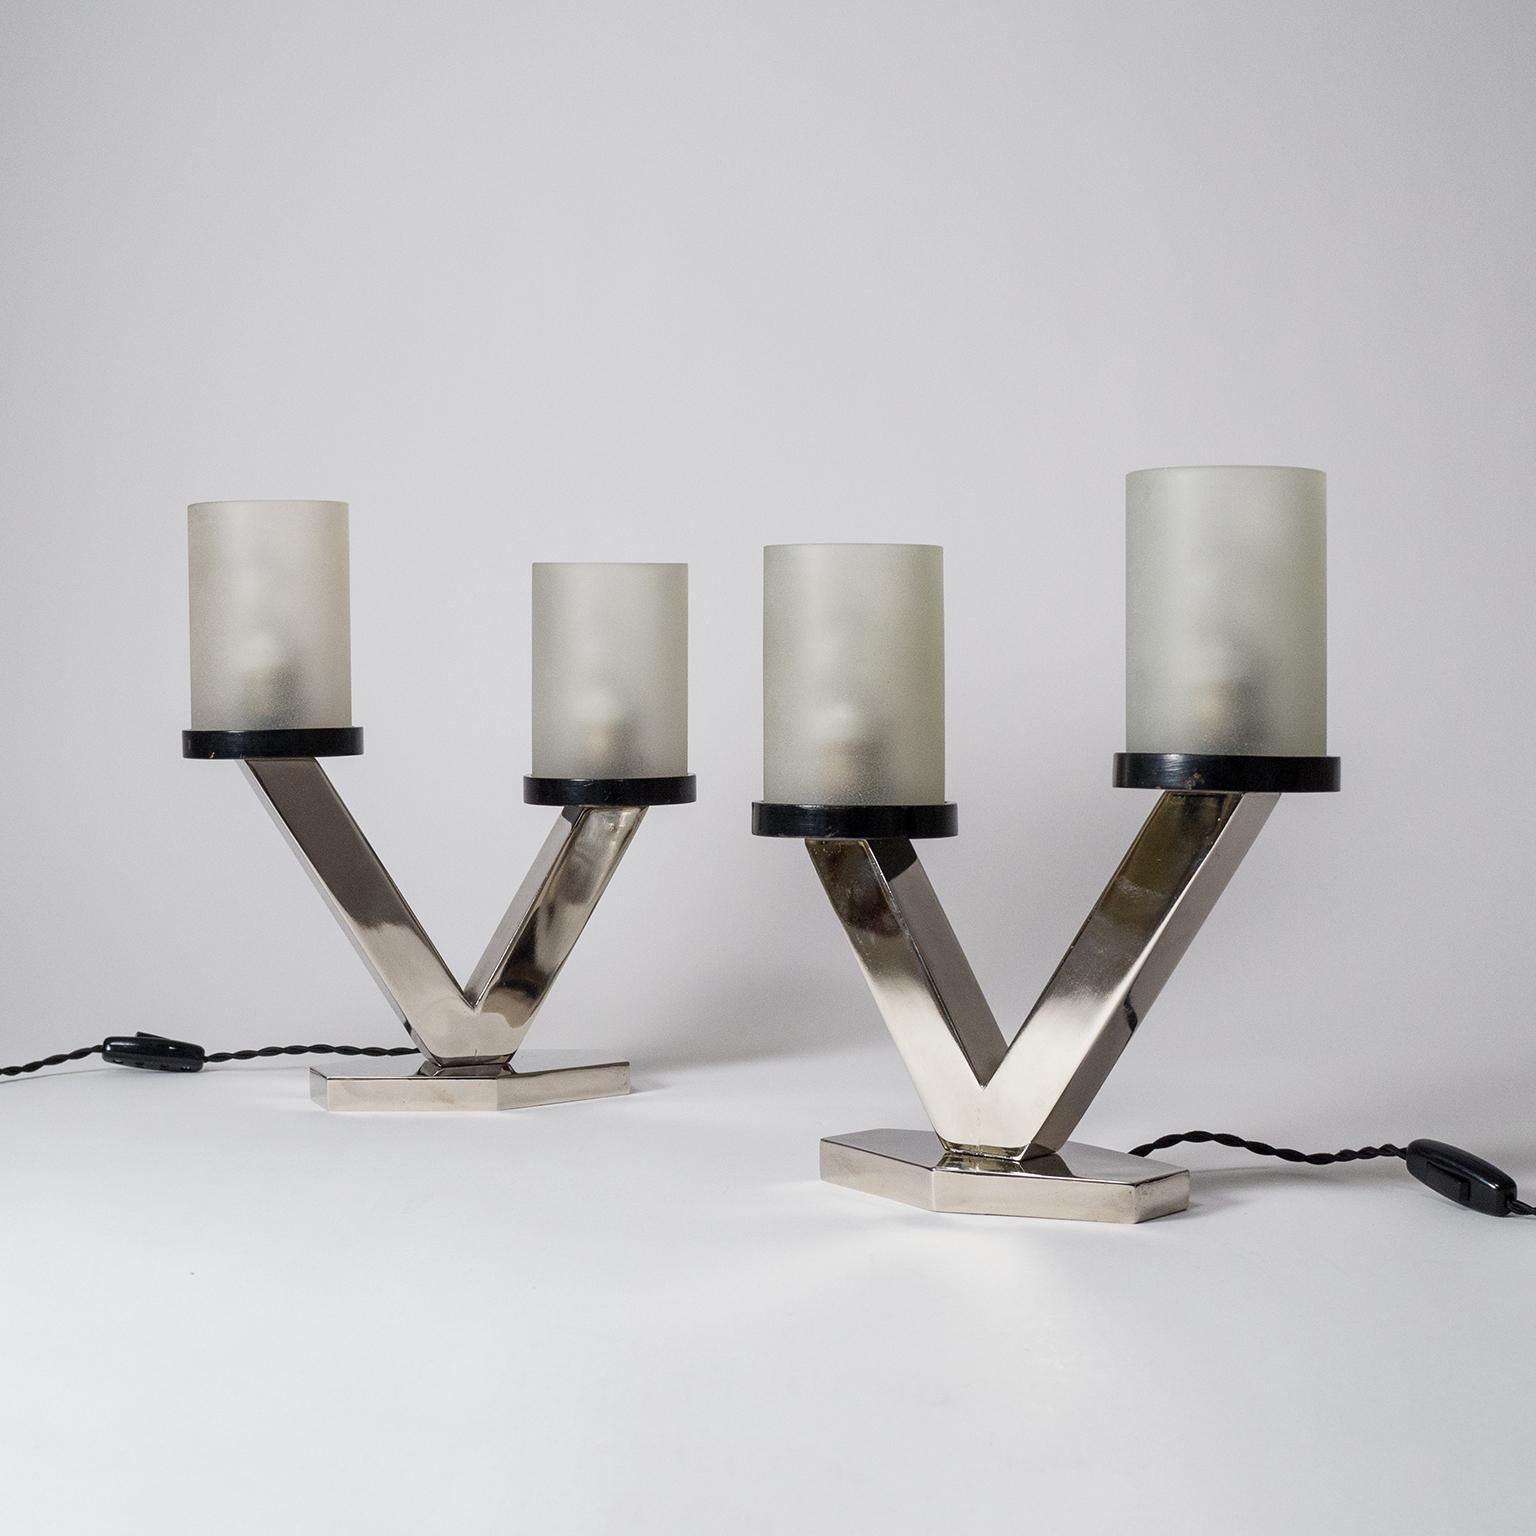 1920s Art Deco Table Lamps, Nickel and Glass 10